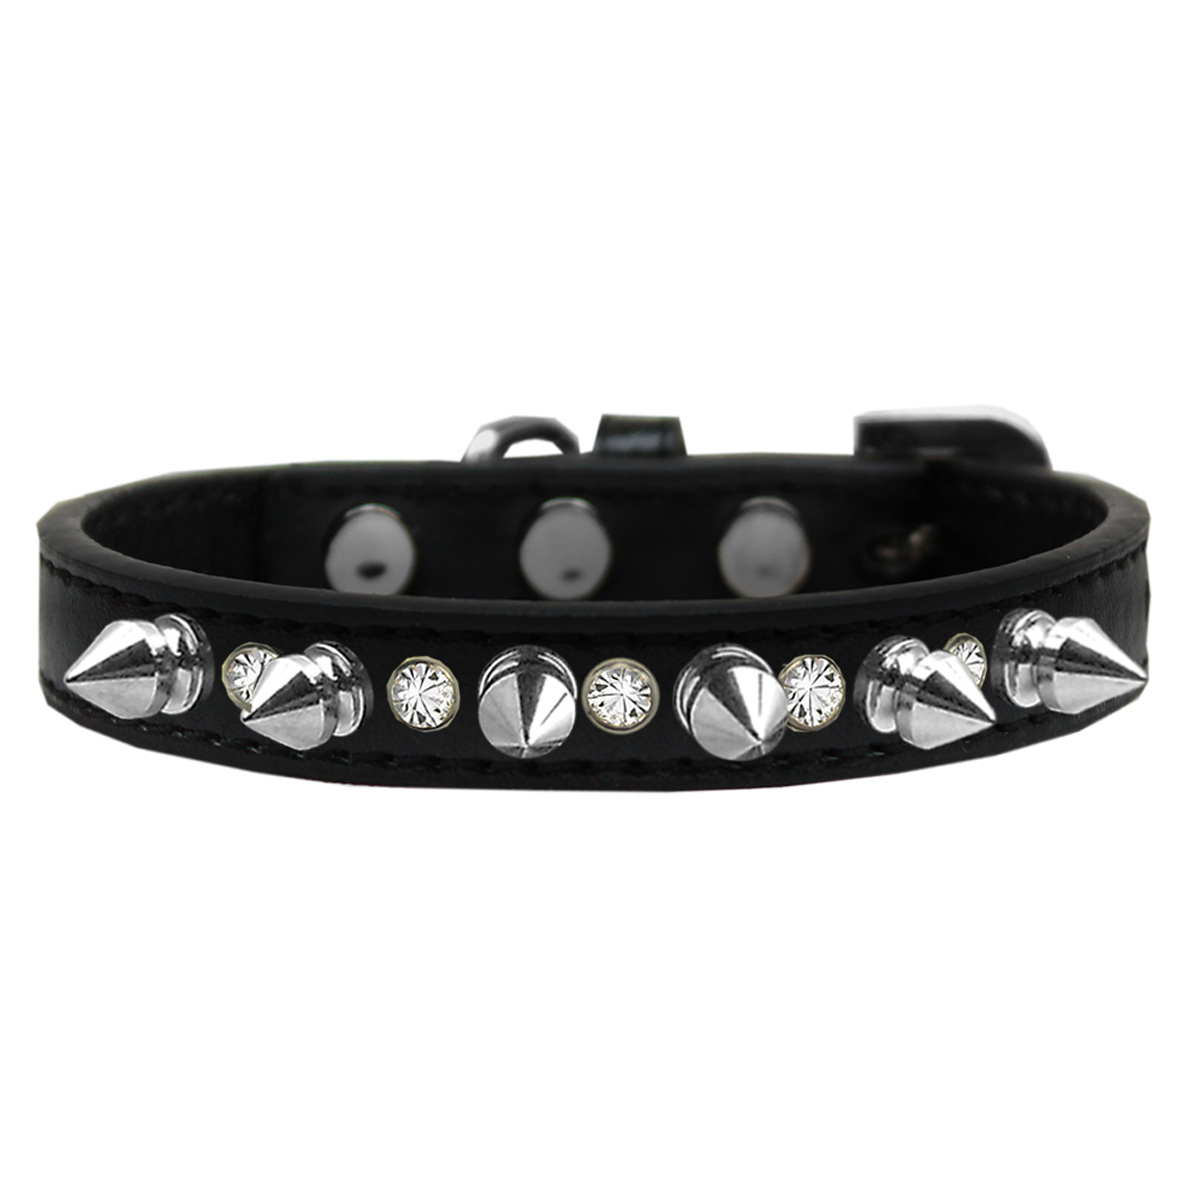 Crystals & Silver Spikes Dog Collar, Black - Size 16